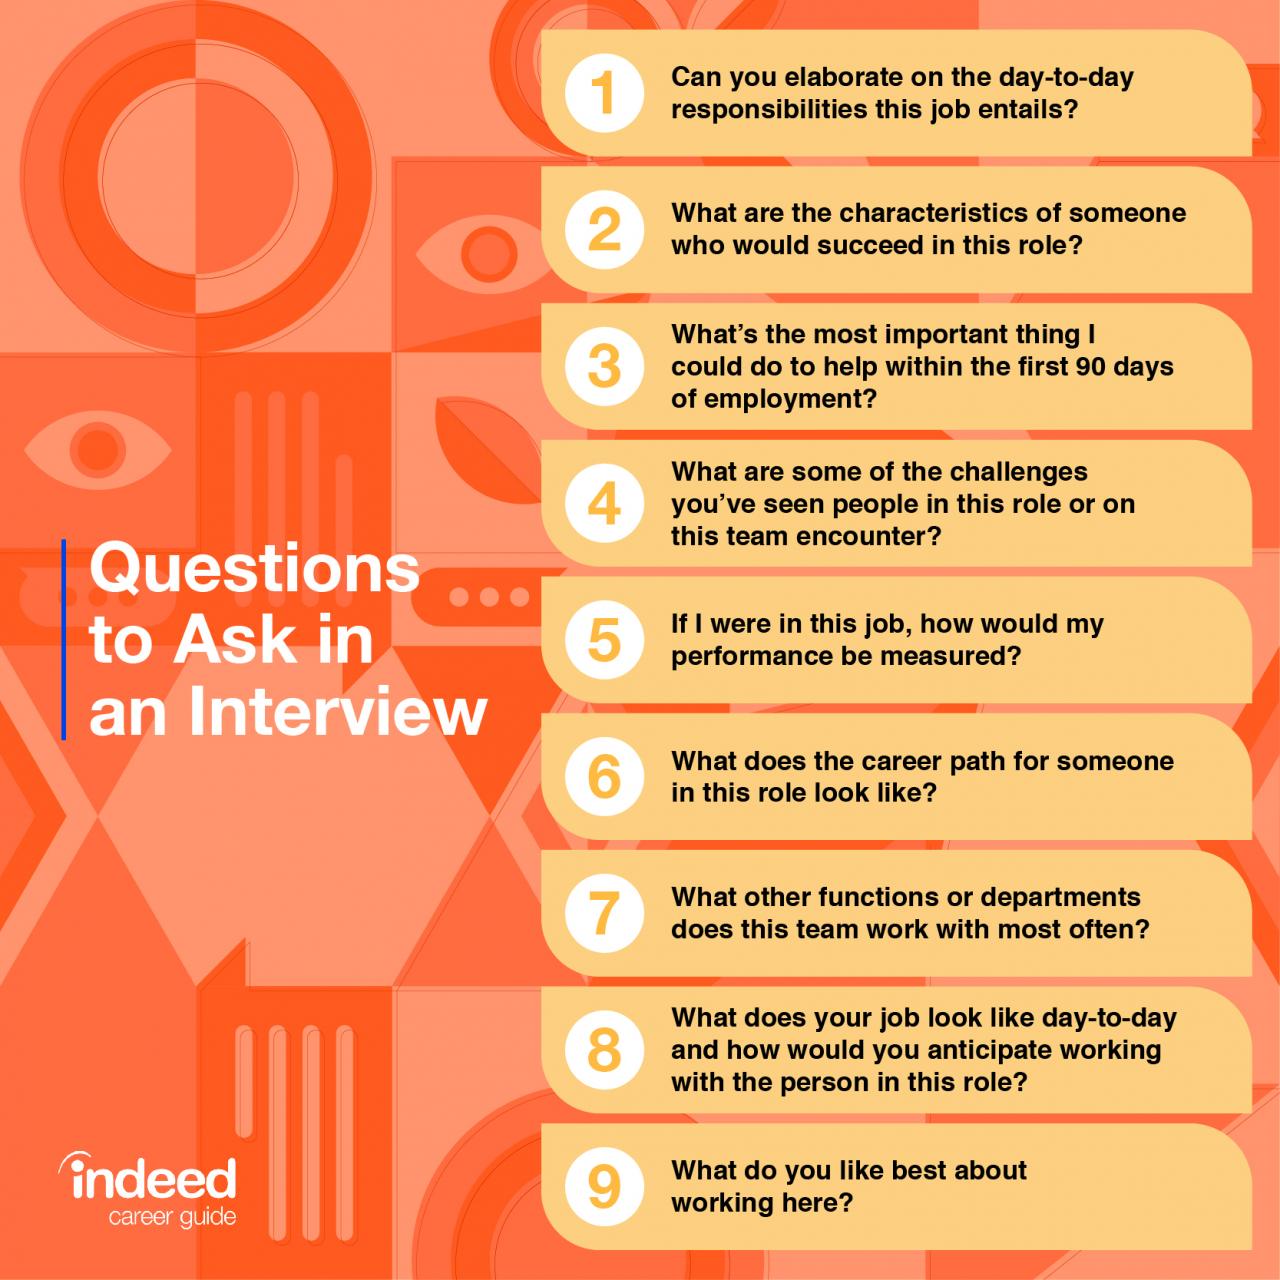 Best questions to ask an interview candidate